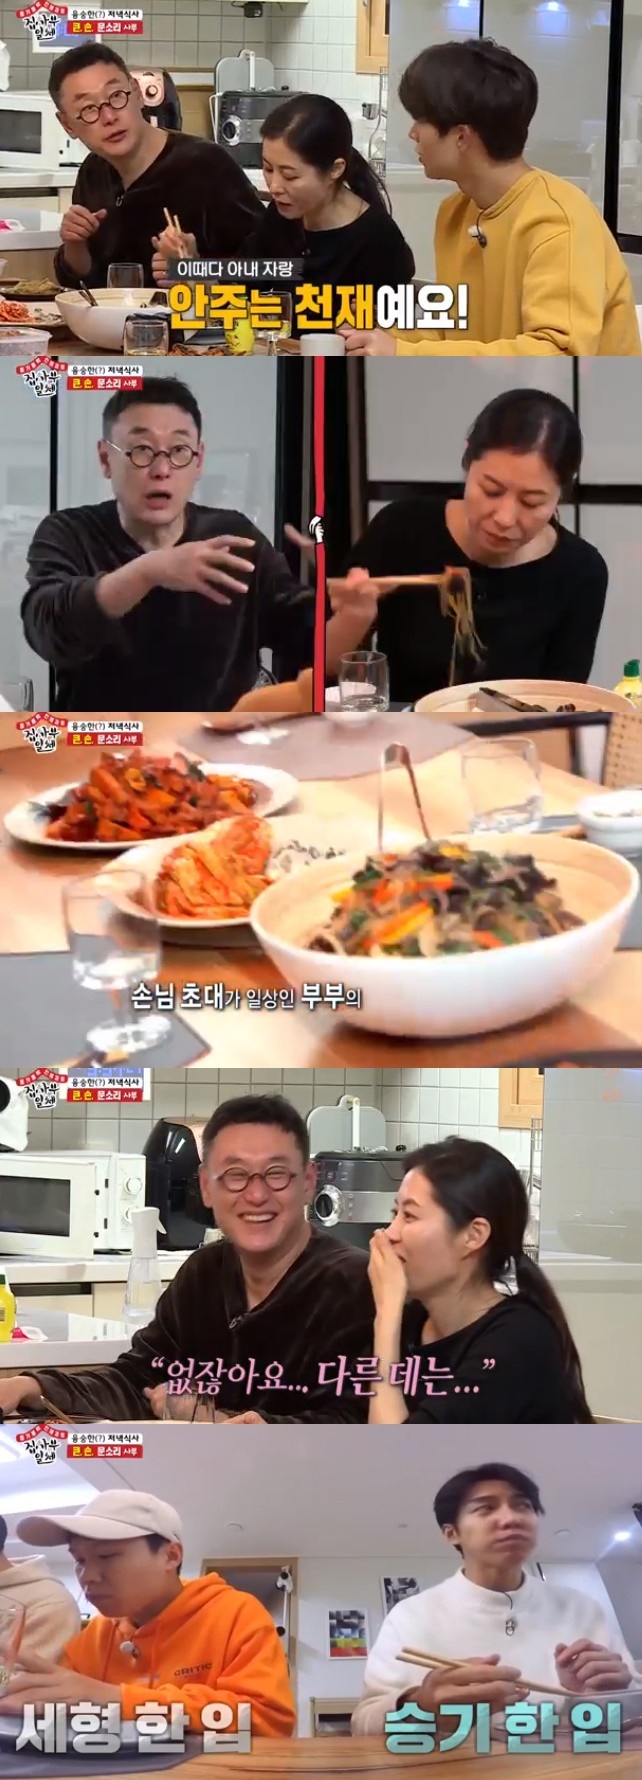 Seoul = = Jang Joon-hwan praised his wife Moon So-ri for her cooking skills.On the 5th SBS All The Butlers, a day was drawn with the representative movie, Jang Joon-hwan, and actor Moon So-ri.On this day, Moon So-ri enjoyed dinner with a chicken ribs, oyster dishes, and chows to Lee Sang-yoon Lee Seung-gi Yang Se-hyeong Yook Sungjae.Yook Sungjae admired I think I would have eaten it every day if I was near my house, and Lee Seung-gi said, I was treated well for a long time.Jang Joon-hwan praised Moon So-ris cooking skills, saying: Anju is a genius.I make it too well even if it is made with refrigerator material, he said. I think it is because I have eaten so much. When Moon So-ri cooks, Jang Joon-hwan does the dishes; Jang Joon-hwan said, I promised that I dont have to wash the dishes when I get married.So when I moved here, I wanted to have a dishwasher. Moon So-ri said, I can not do this much because I have done this much as it is just tofu cut. When I do a lot and you do a lot.This time, I have a lot of people, so I think I should do more next time. Jang Joon-hwan asked what kind of marriage it would be good to meet, If you feel like you can go while looking at the same place, you can solve the rest. Moon So-ri said, What do you talk about so long?I just want you to do it with someone like me. Jang Joon-hwan said,  (Isnt there someone like Moon So-ri) anywhere else? Yang Se-hyeong said, It is the first time I have been so good since Yoo Jae-seok.Moon So-ri said of Jang Joon-hwan: Im on the side of almost no fight, and (Jang Joon-hwan) doesnt get excited Feelingly if hes in a bad mood.It just gets cold, and its a little scary. Then it melts in a little while.(The couple fight) It takes time but it solves if I dont have the mind to Ill beat you now.There are not many people who are close to me and respect me, he said. I live close and look close, but I want to be recognized as a good person.I try to live with my best efforts. My husband still has a respectable heart. 